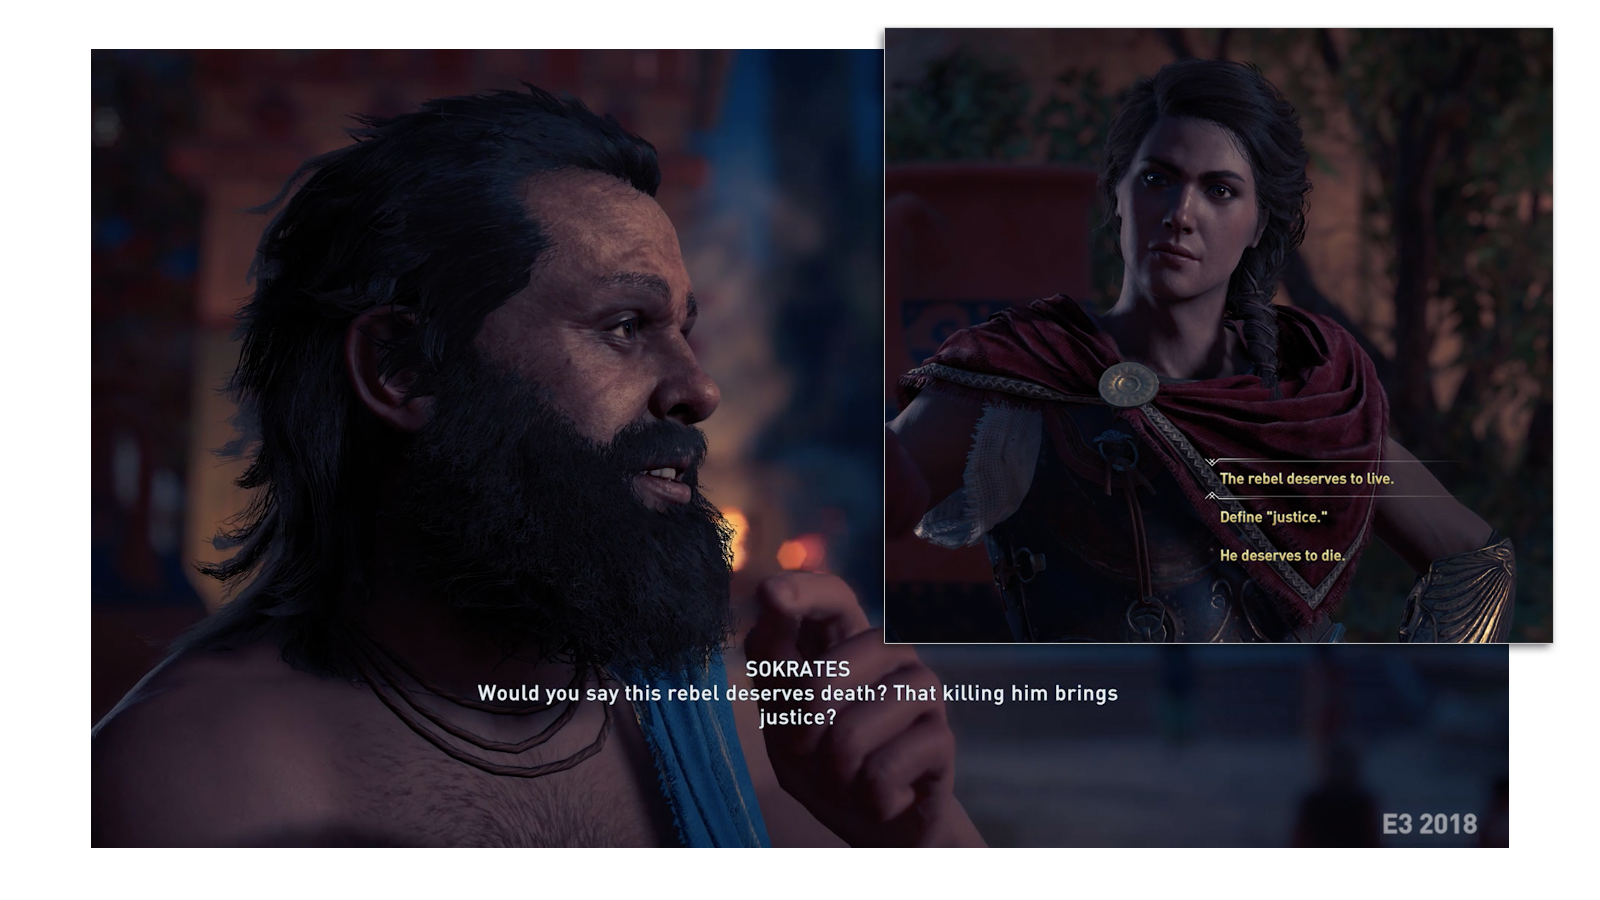 Everything We Learned About Assassin’s Creed Odyssey After Playing It